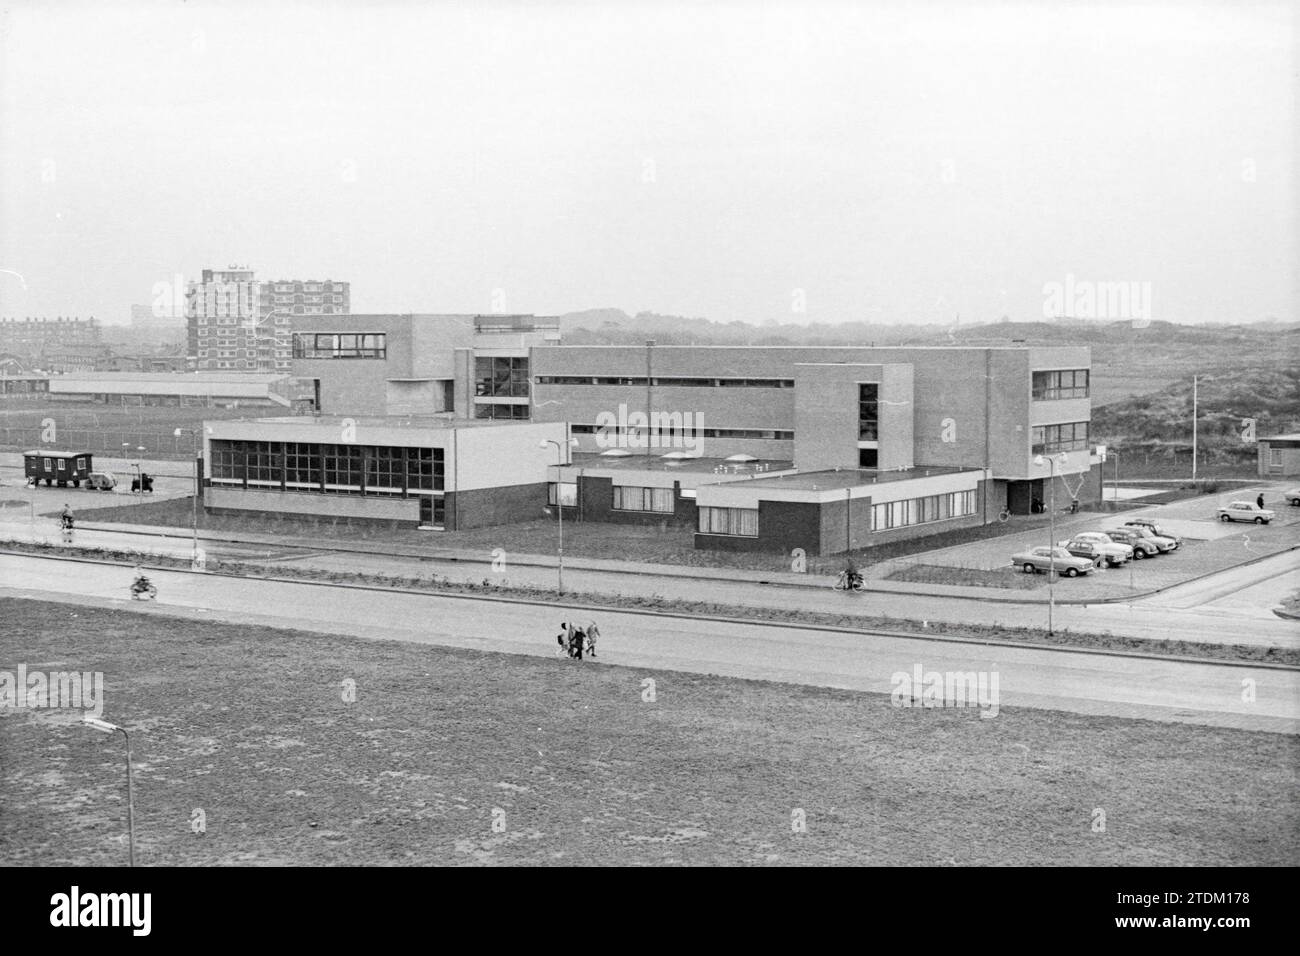 Exterior Prince Berhard School, IJmuiden, The Netherlands, 23-11-1971, Whizgle News from the Past, Tailored for the Future. Explore historical narratives, Dutch The Netherlands agency image with a modern perspective, bridging the gap between yesterday's events and tomorrow's insights. A timeless journey shaping the stories that shape our future Stock Photo